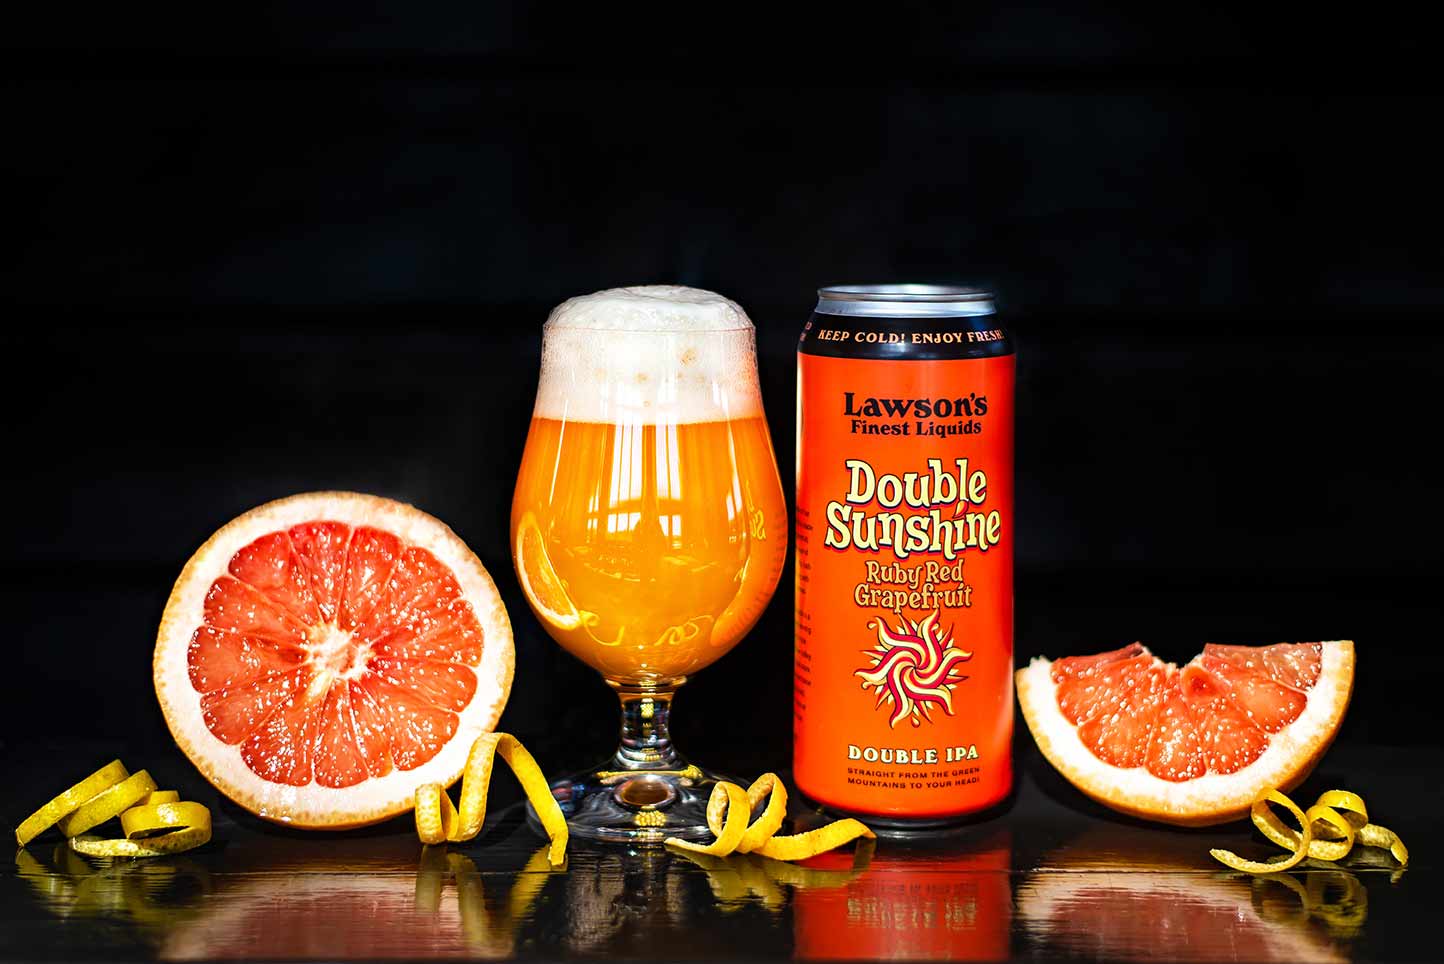 Double Sunshine with Ruby Red Grapefruit